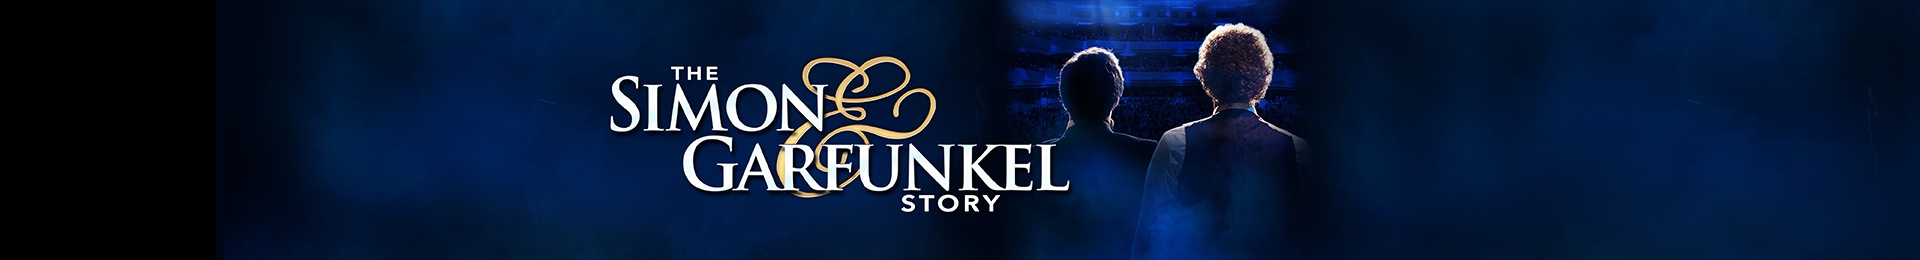 The Simon and Garfunkel Story Special banner image